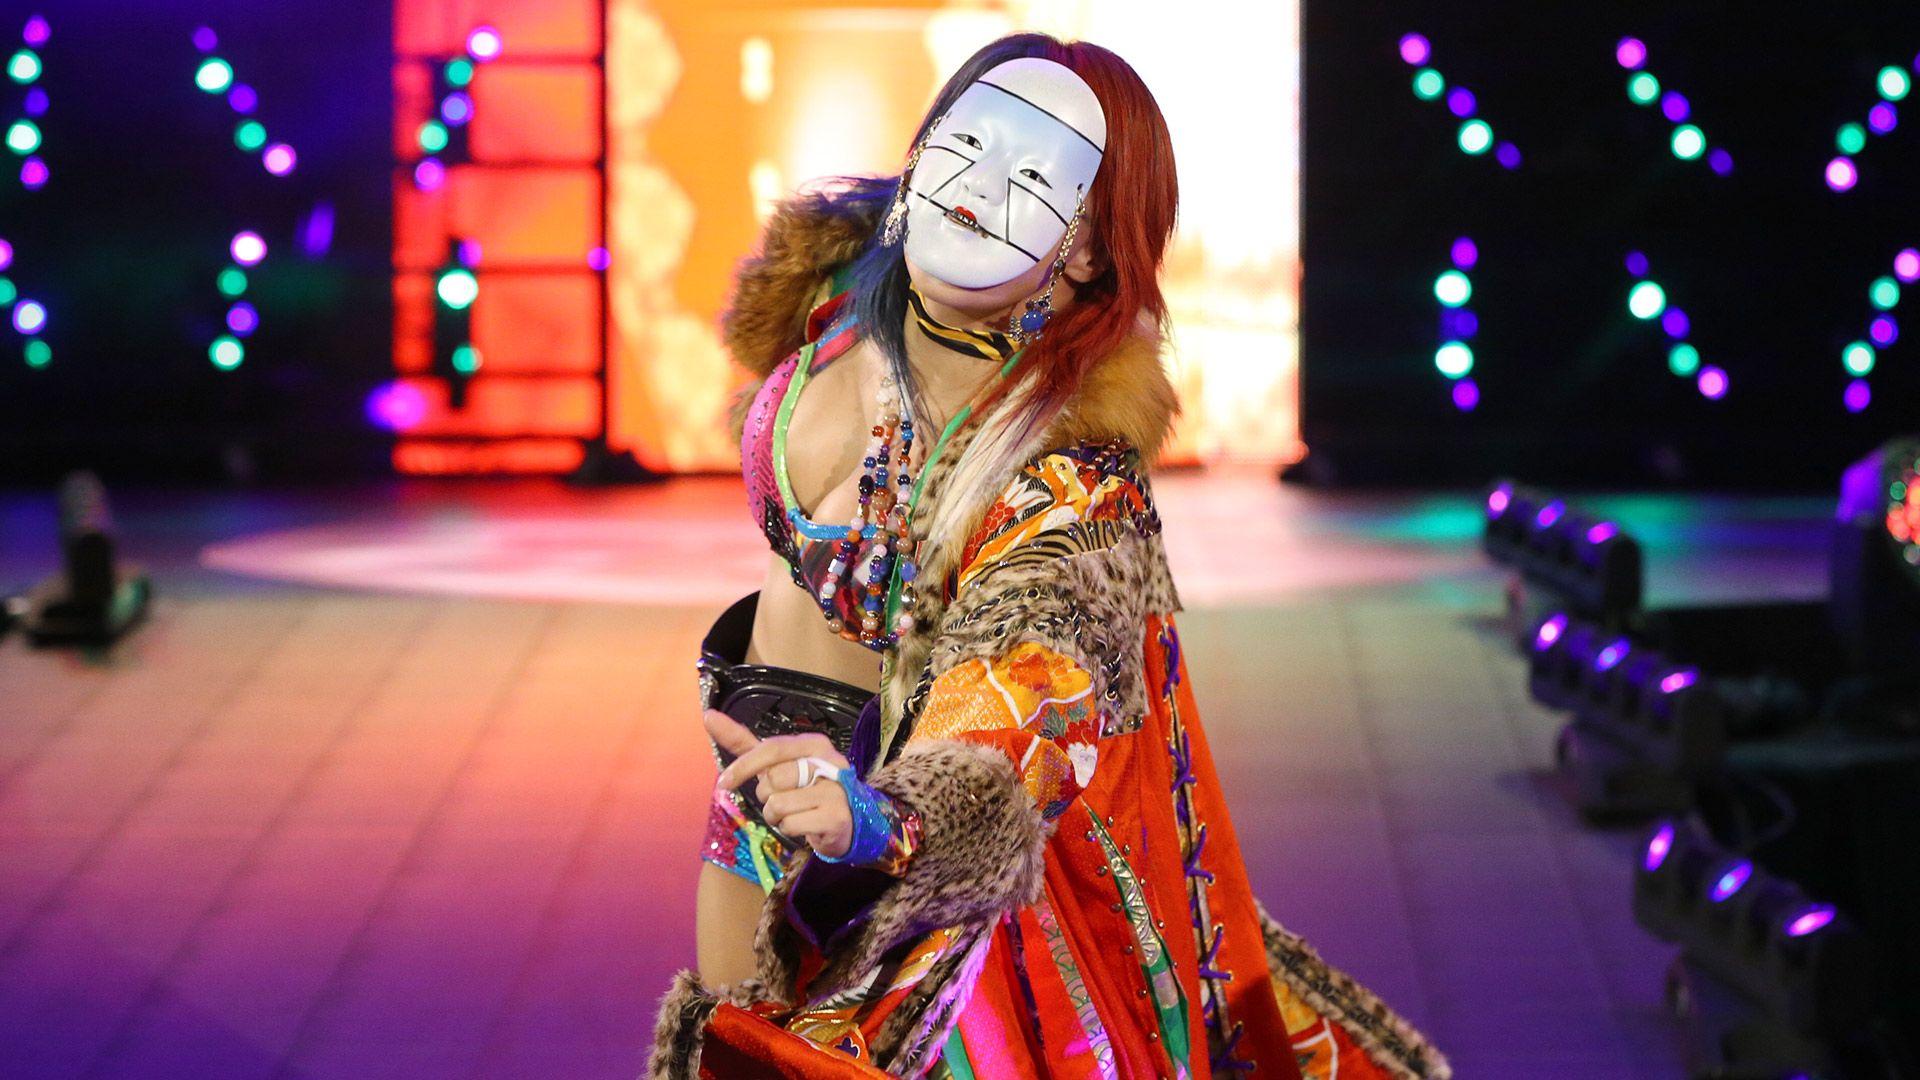 Will Asuka's Dominance Continue On The WWE Main Roster?